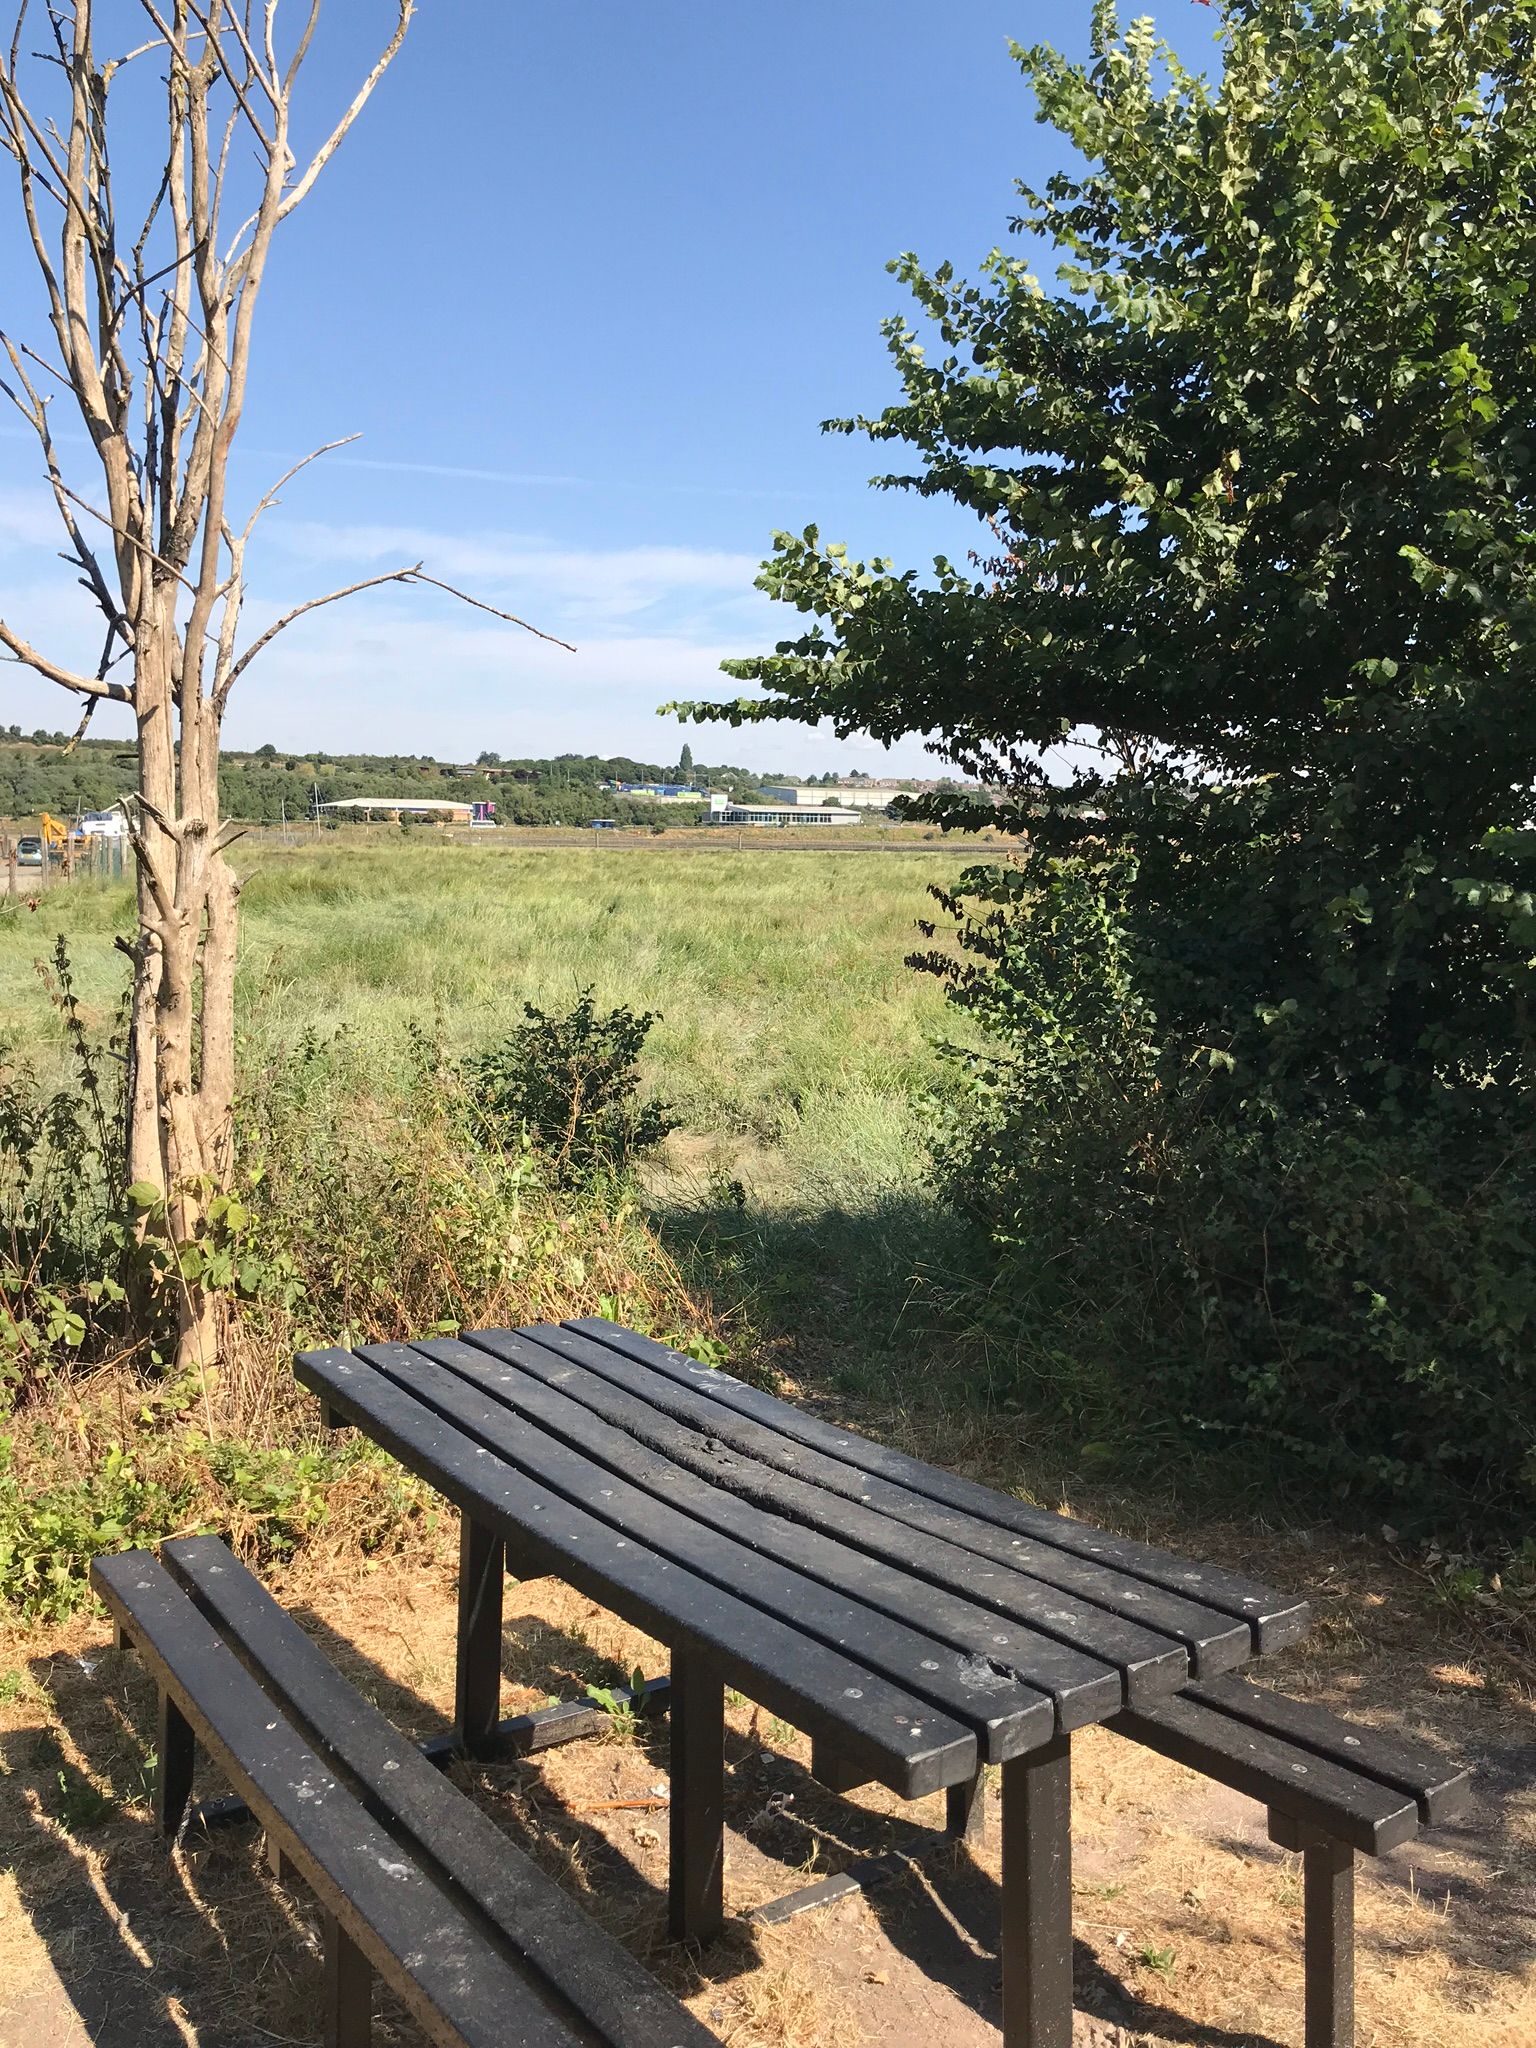 View as you sit at the picnic table and look across the River Medway from Baty's Marsh.